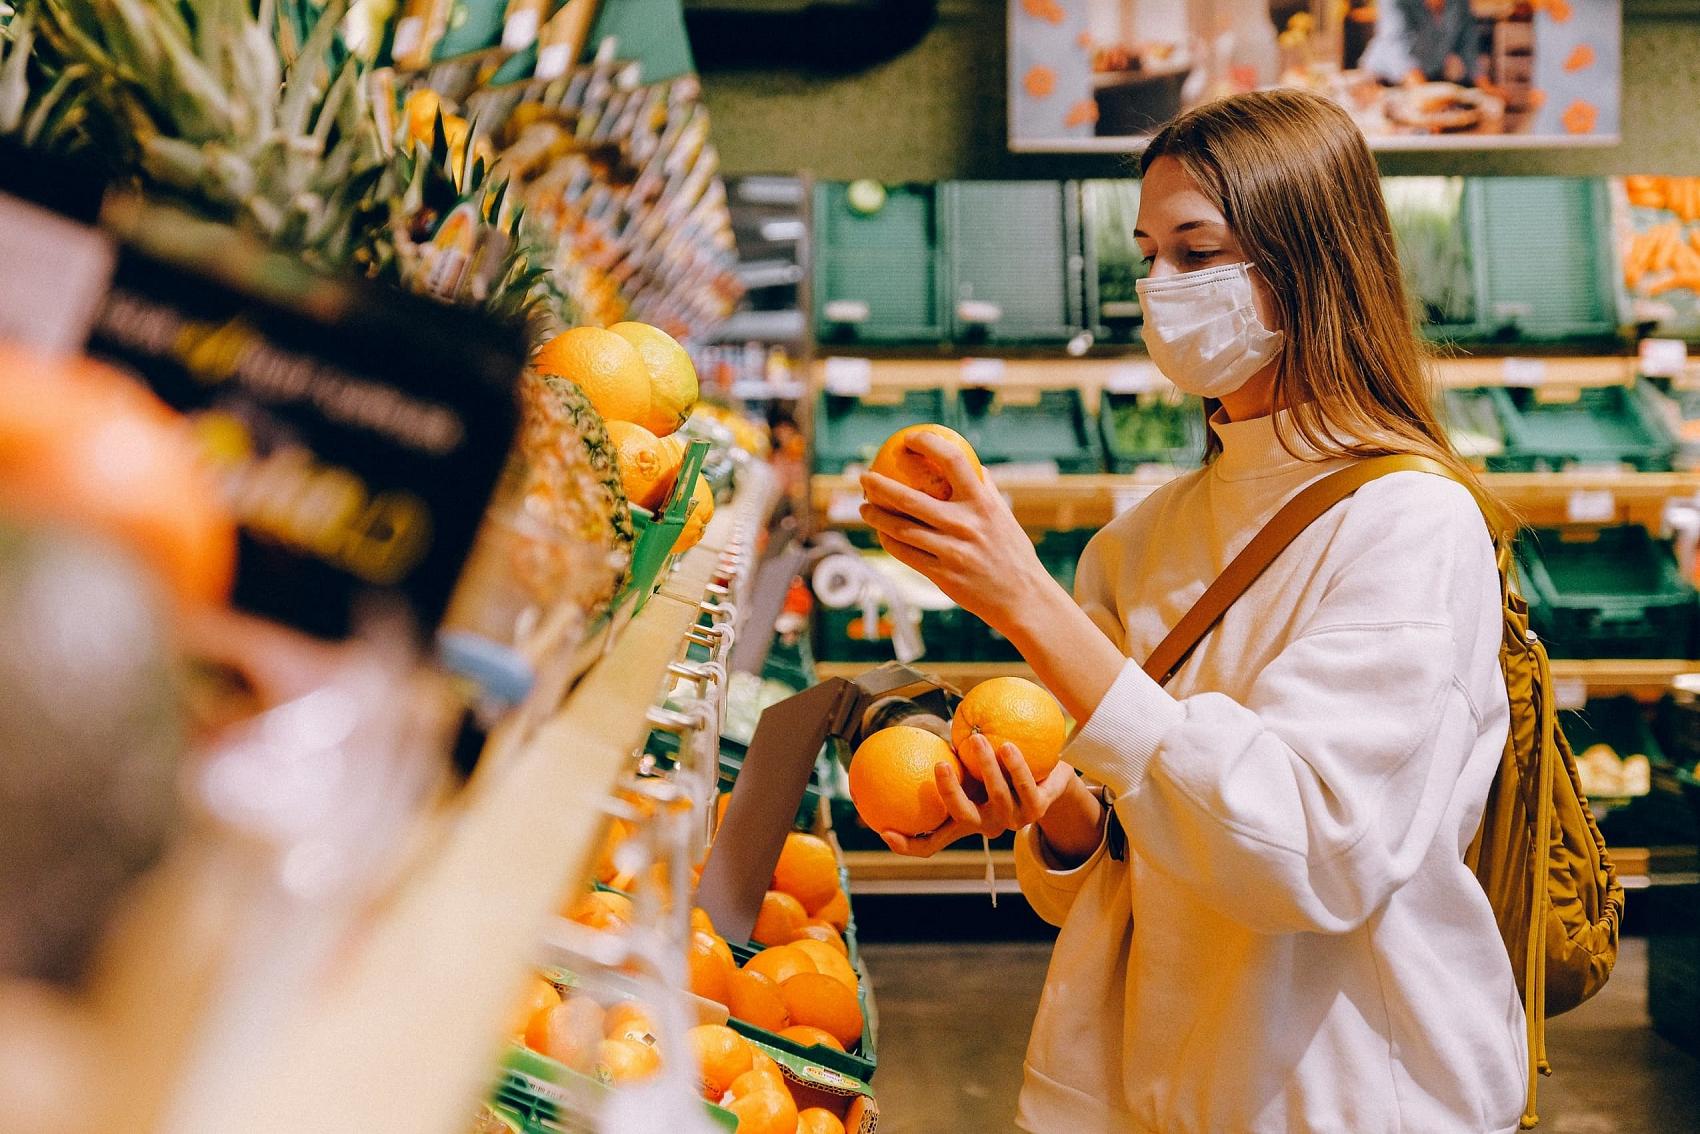 Woman with mask shopping